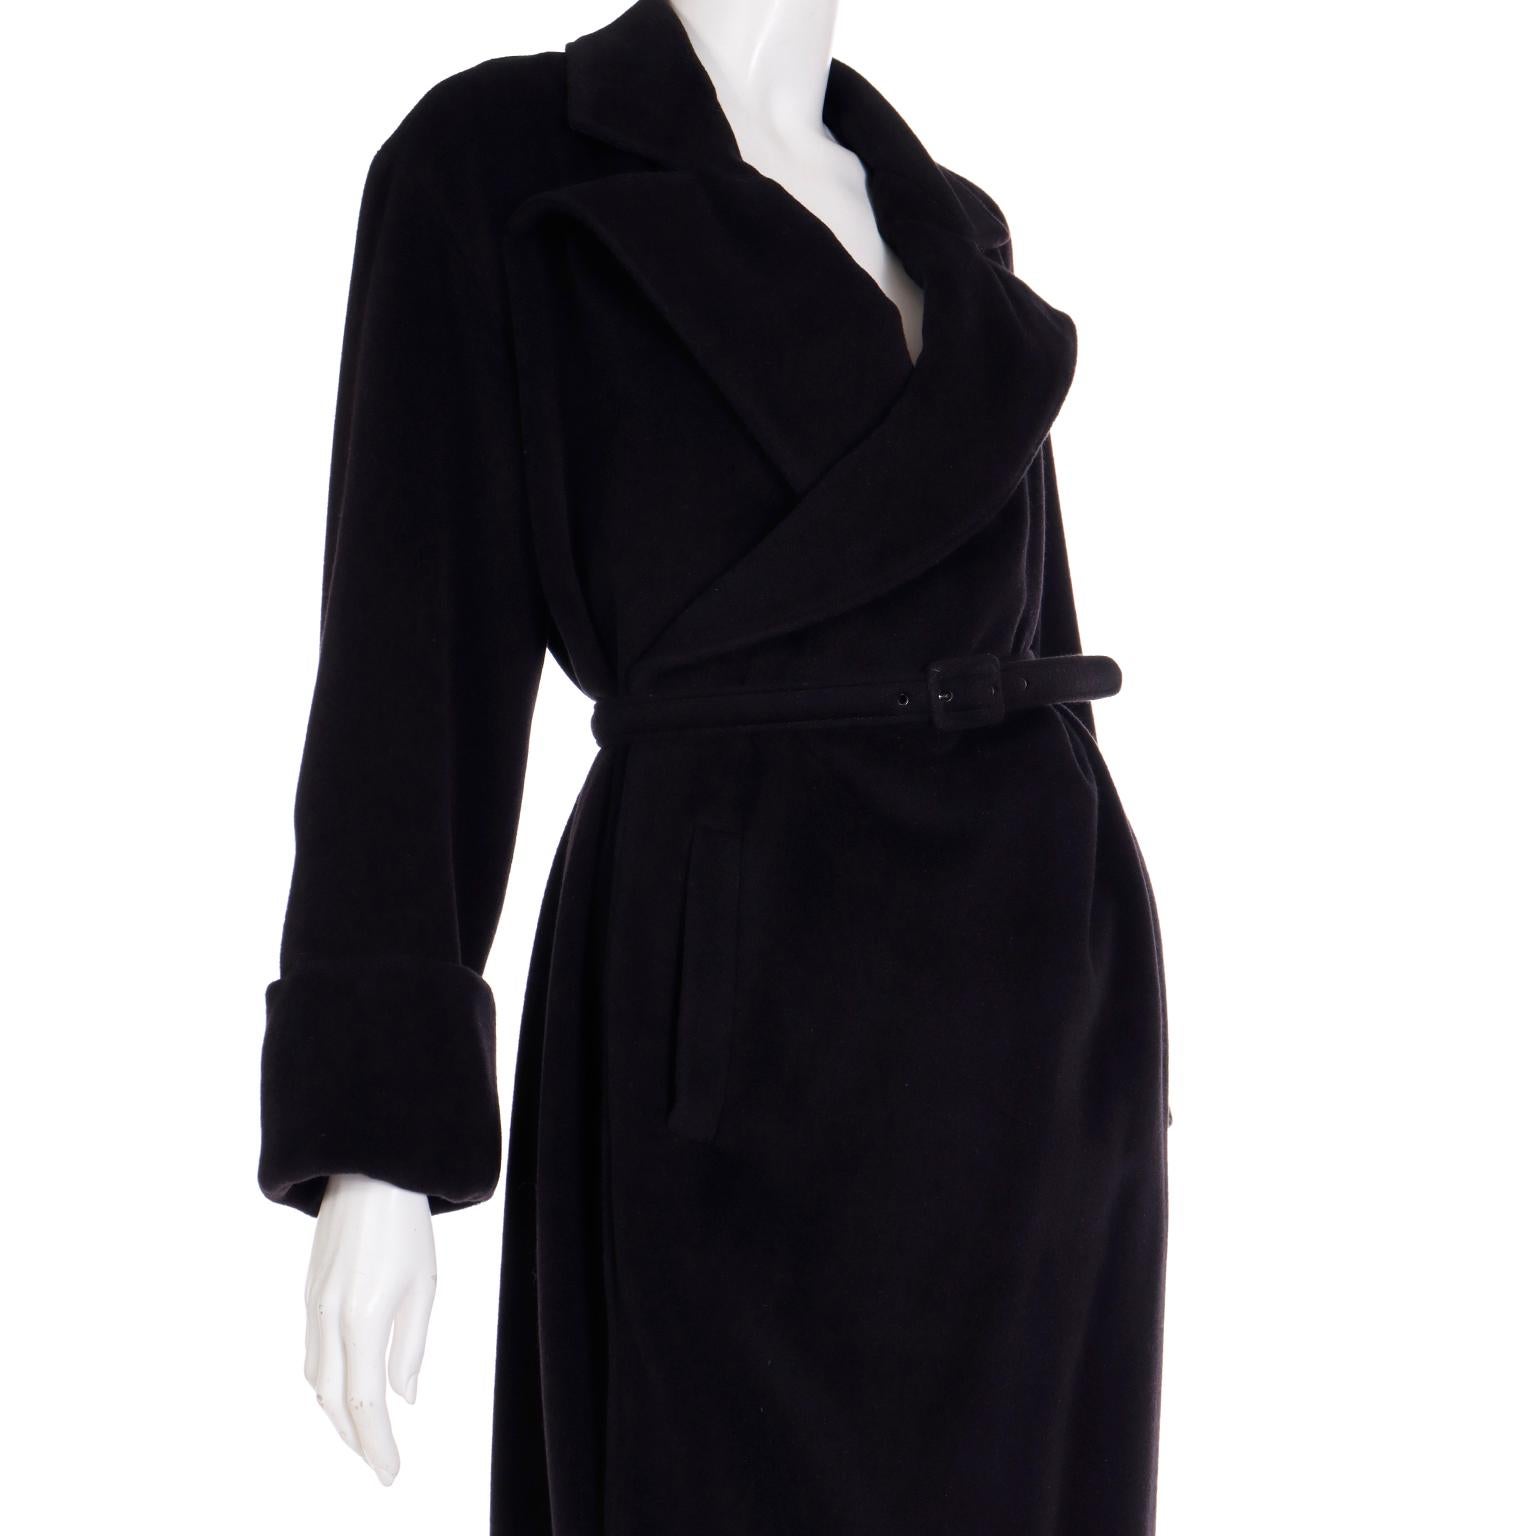 F/W 2000 Jean Paul Gaultier Black Angora Wool Coat with Belt & Signature LIning For Sale 3